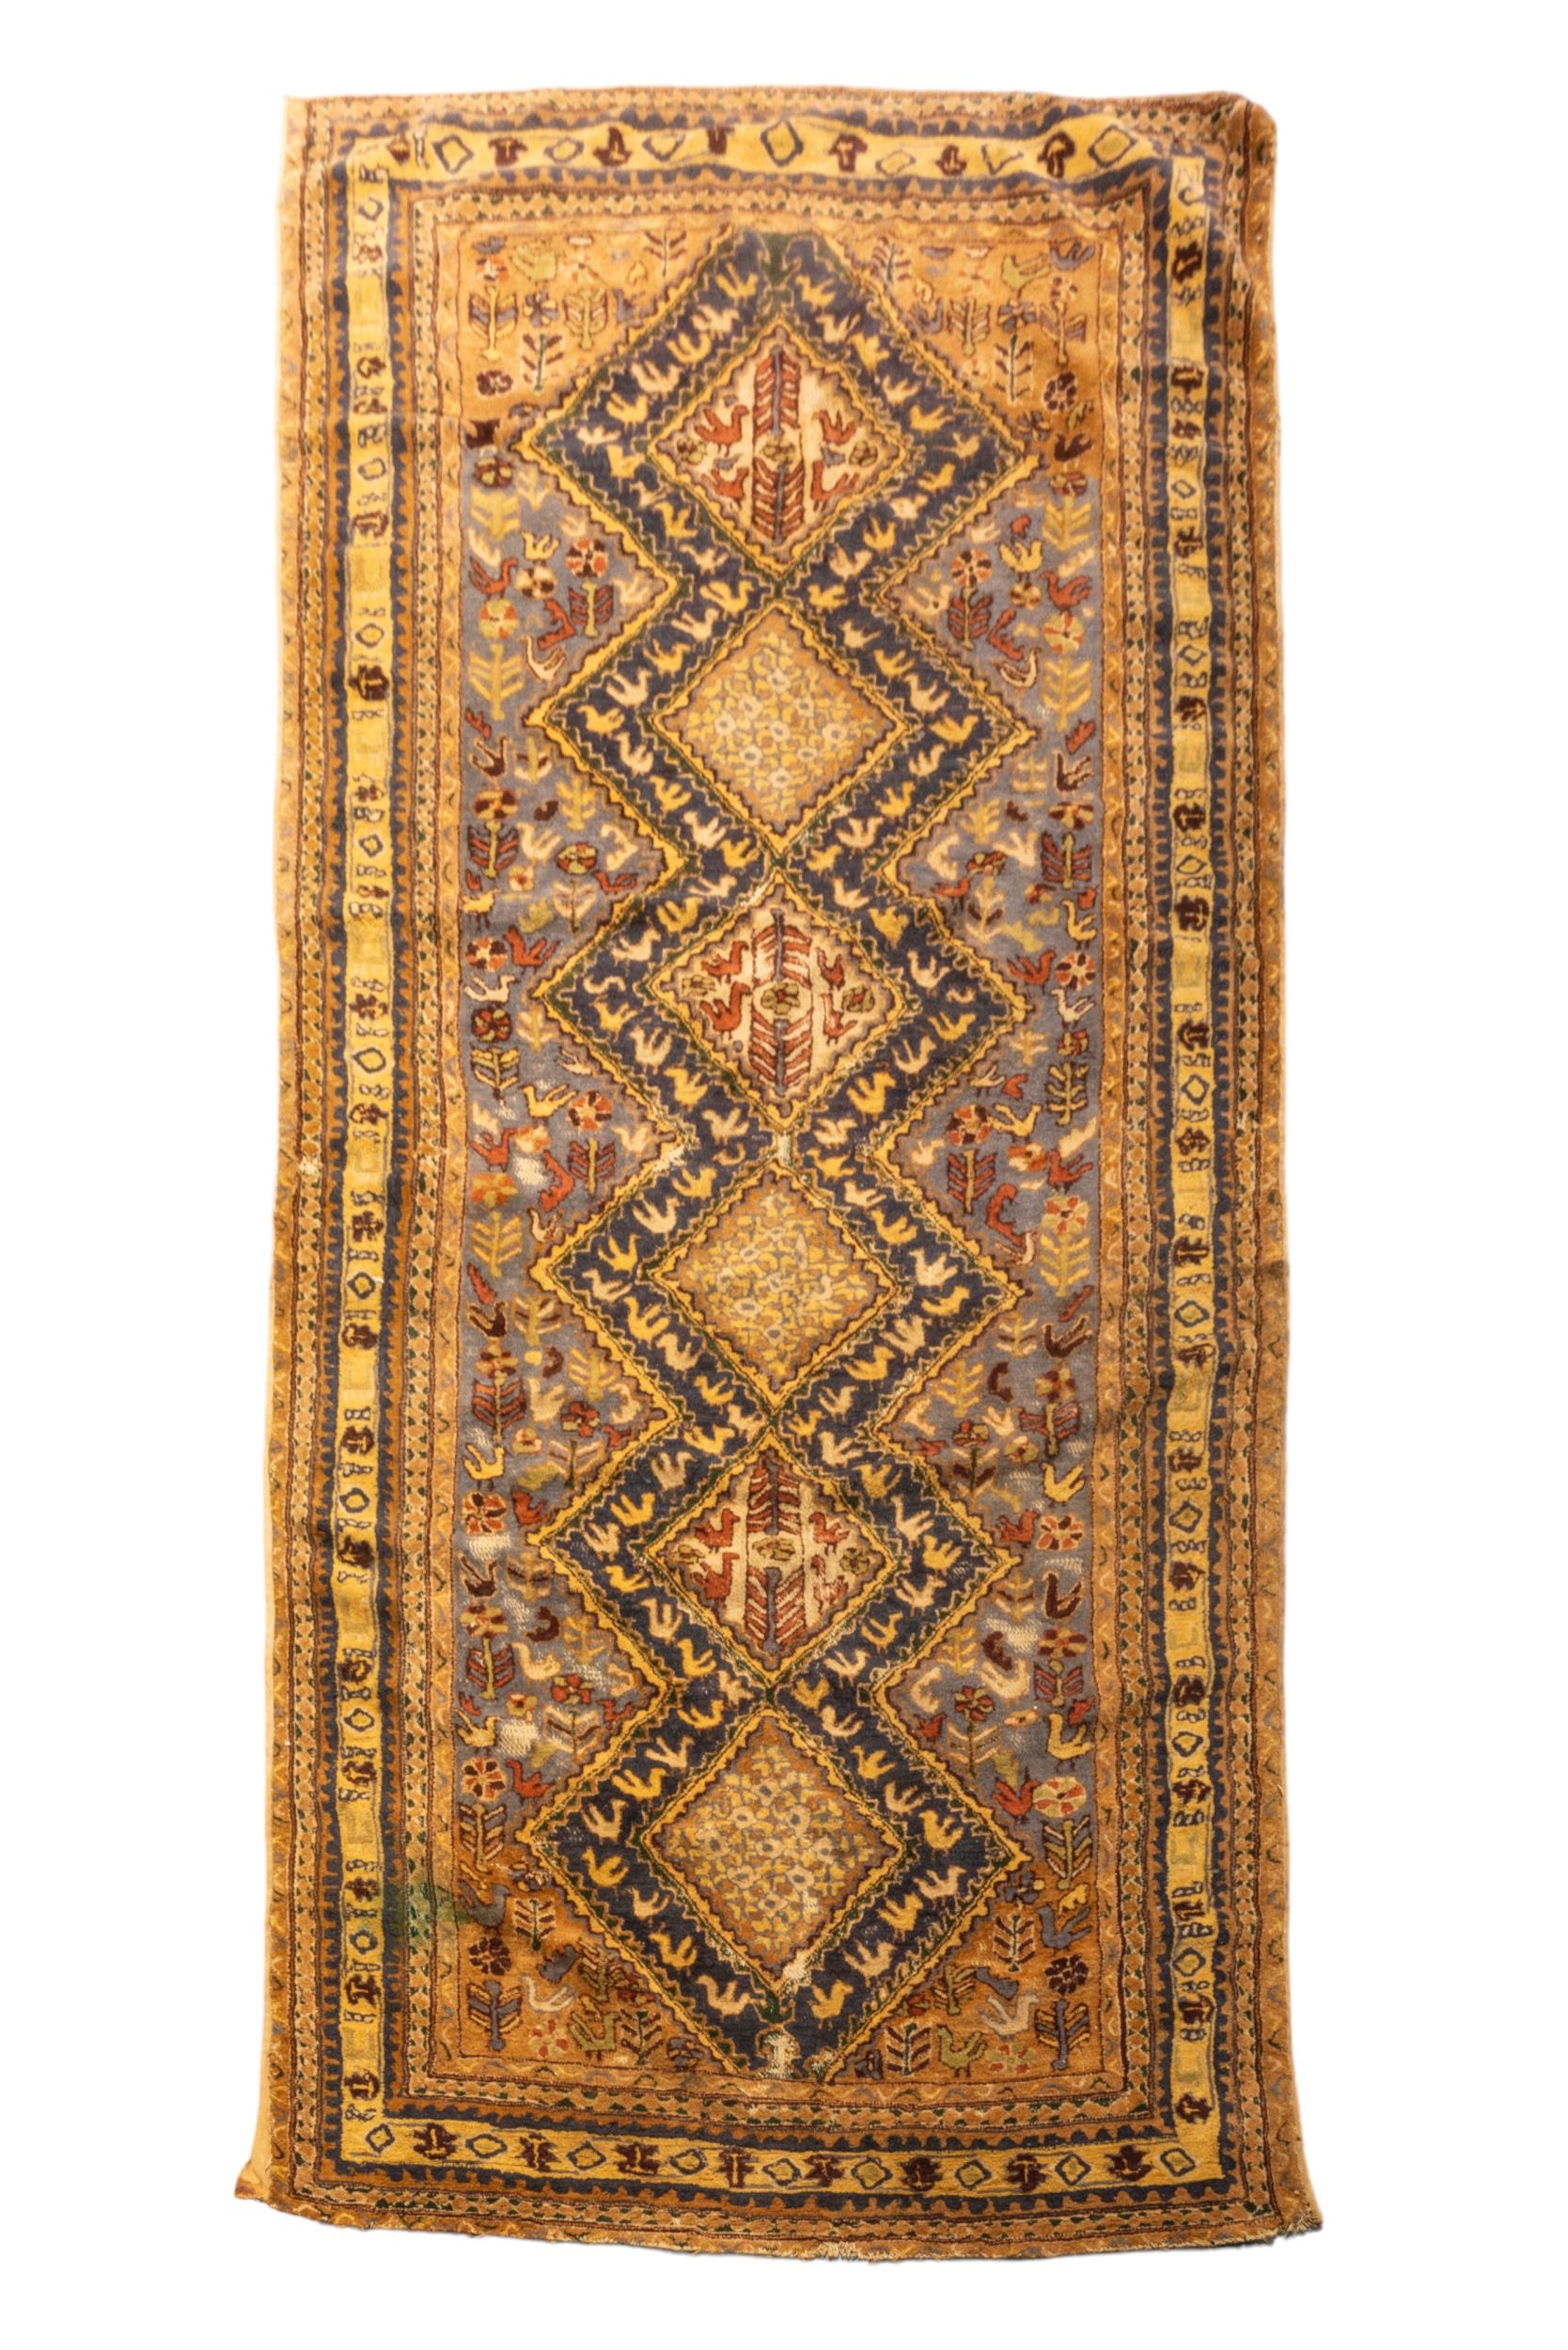 A HAND KNOTTED PERSIAN RUNNER, LATE 19TH/EARLY 20TH CENTURY, probably Hamadan or Sumac (Ardebil),